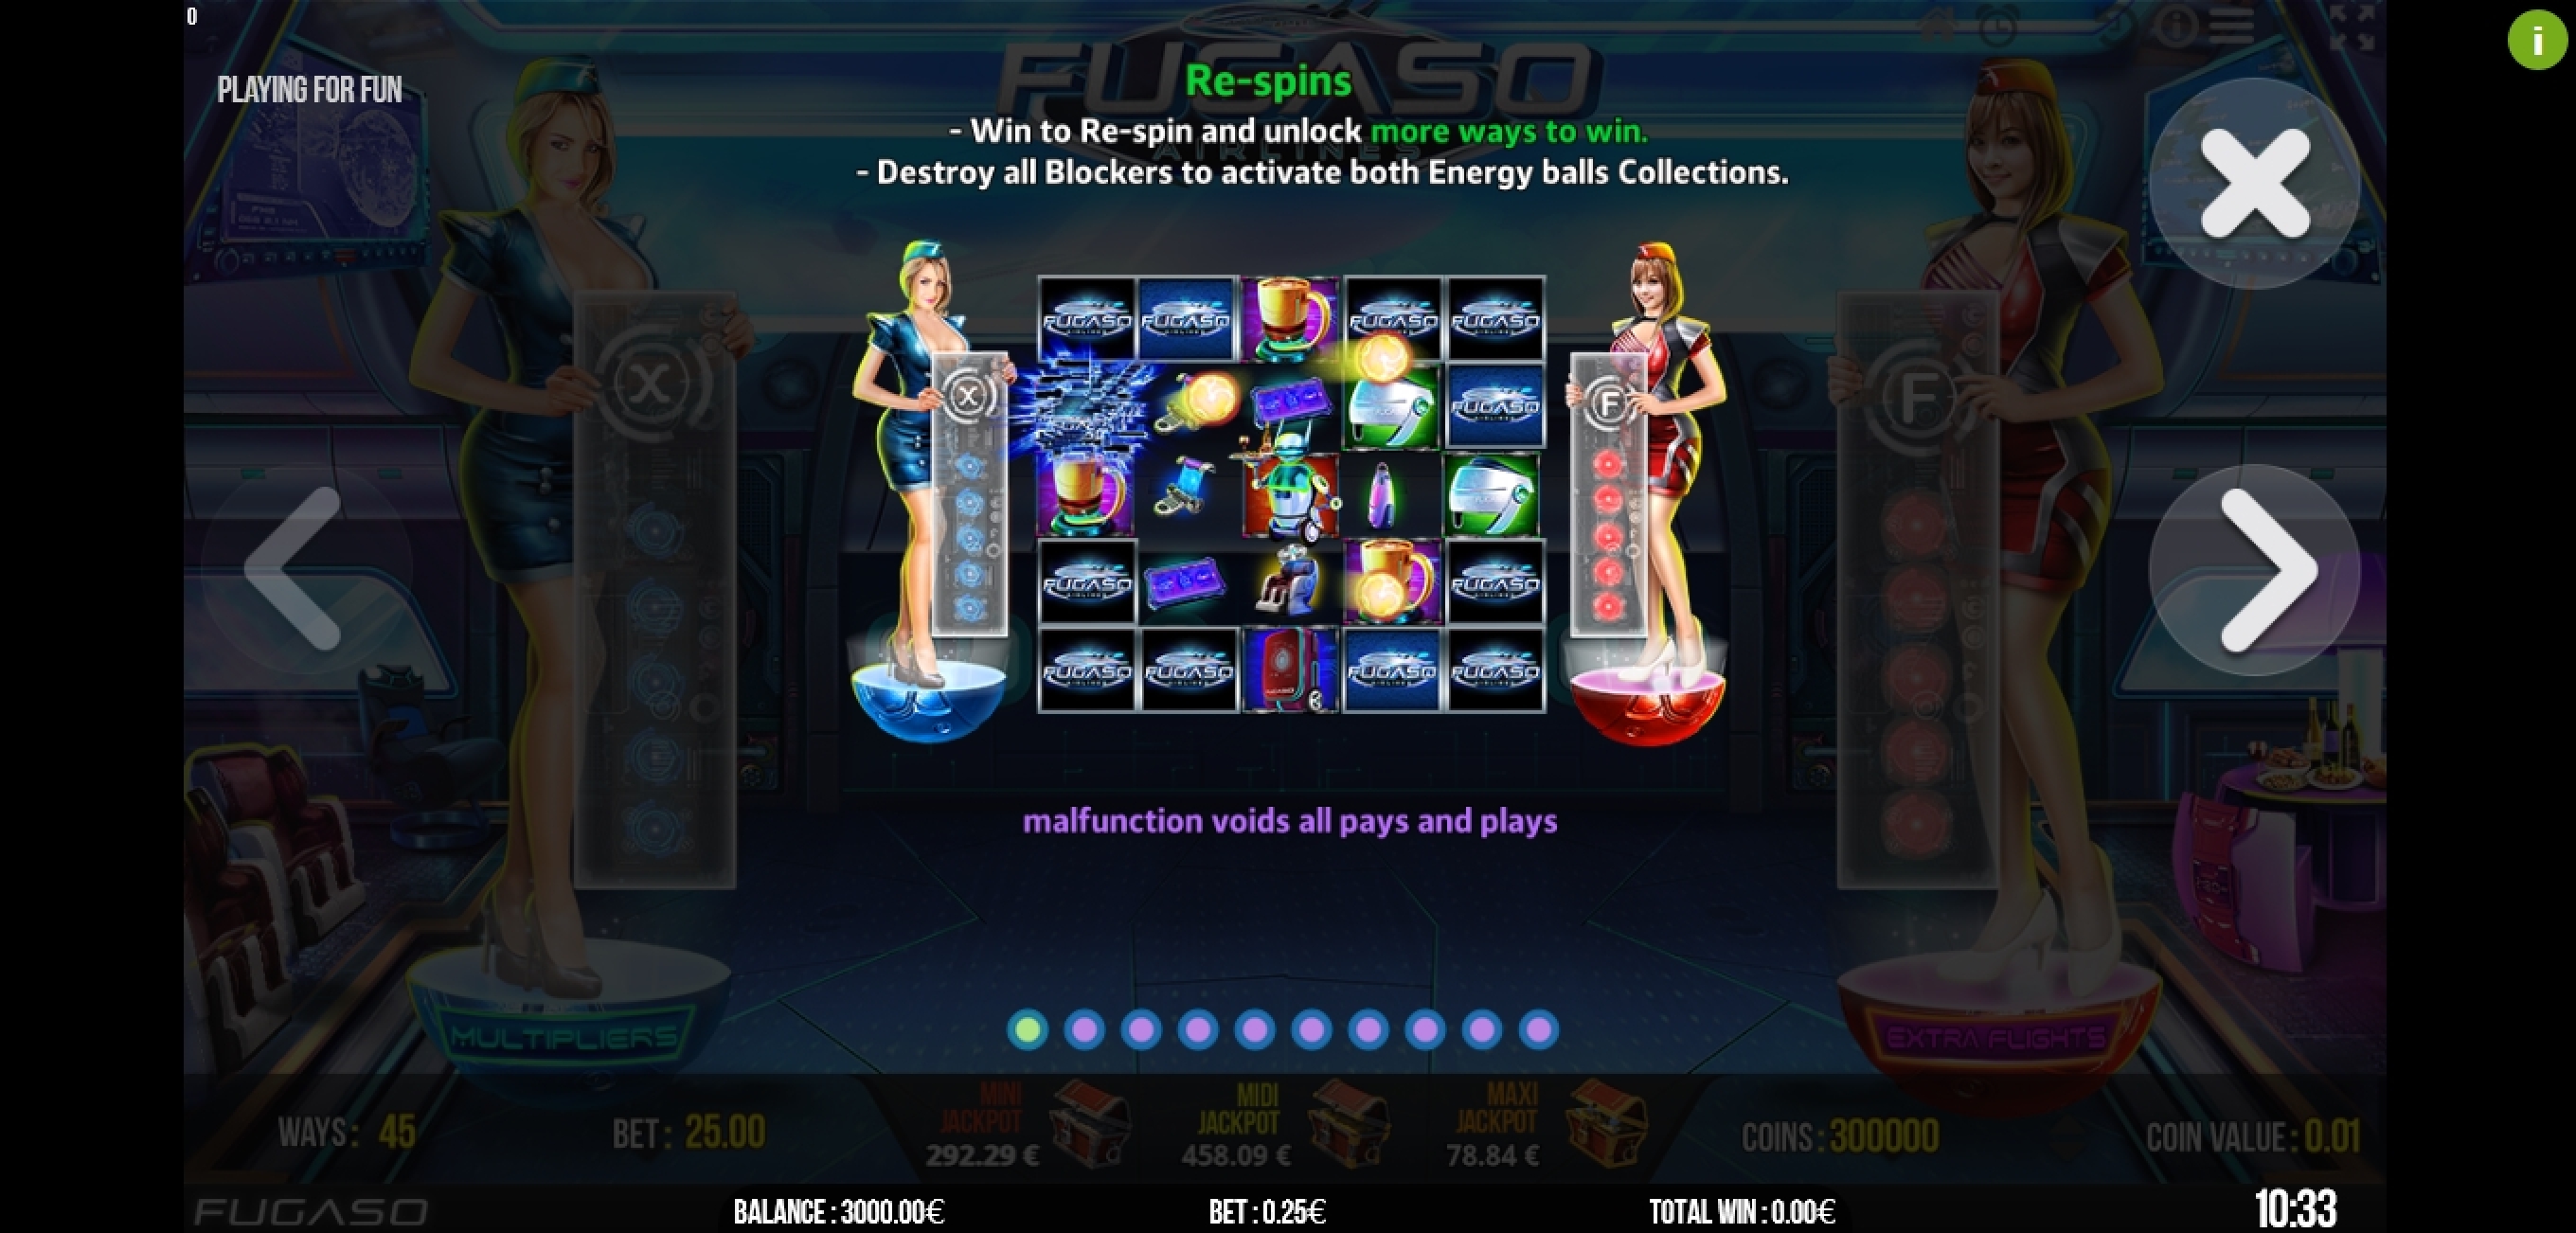 Info of Fugaso Airlines Slot Game by Fugaso